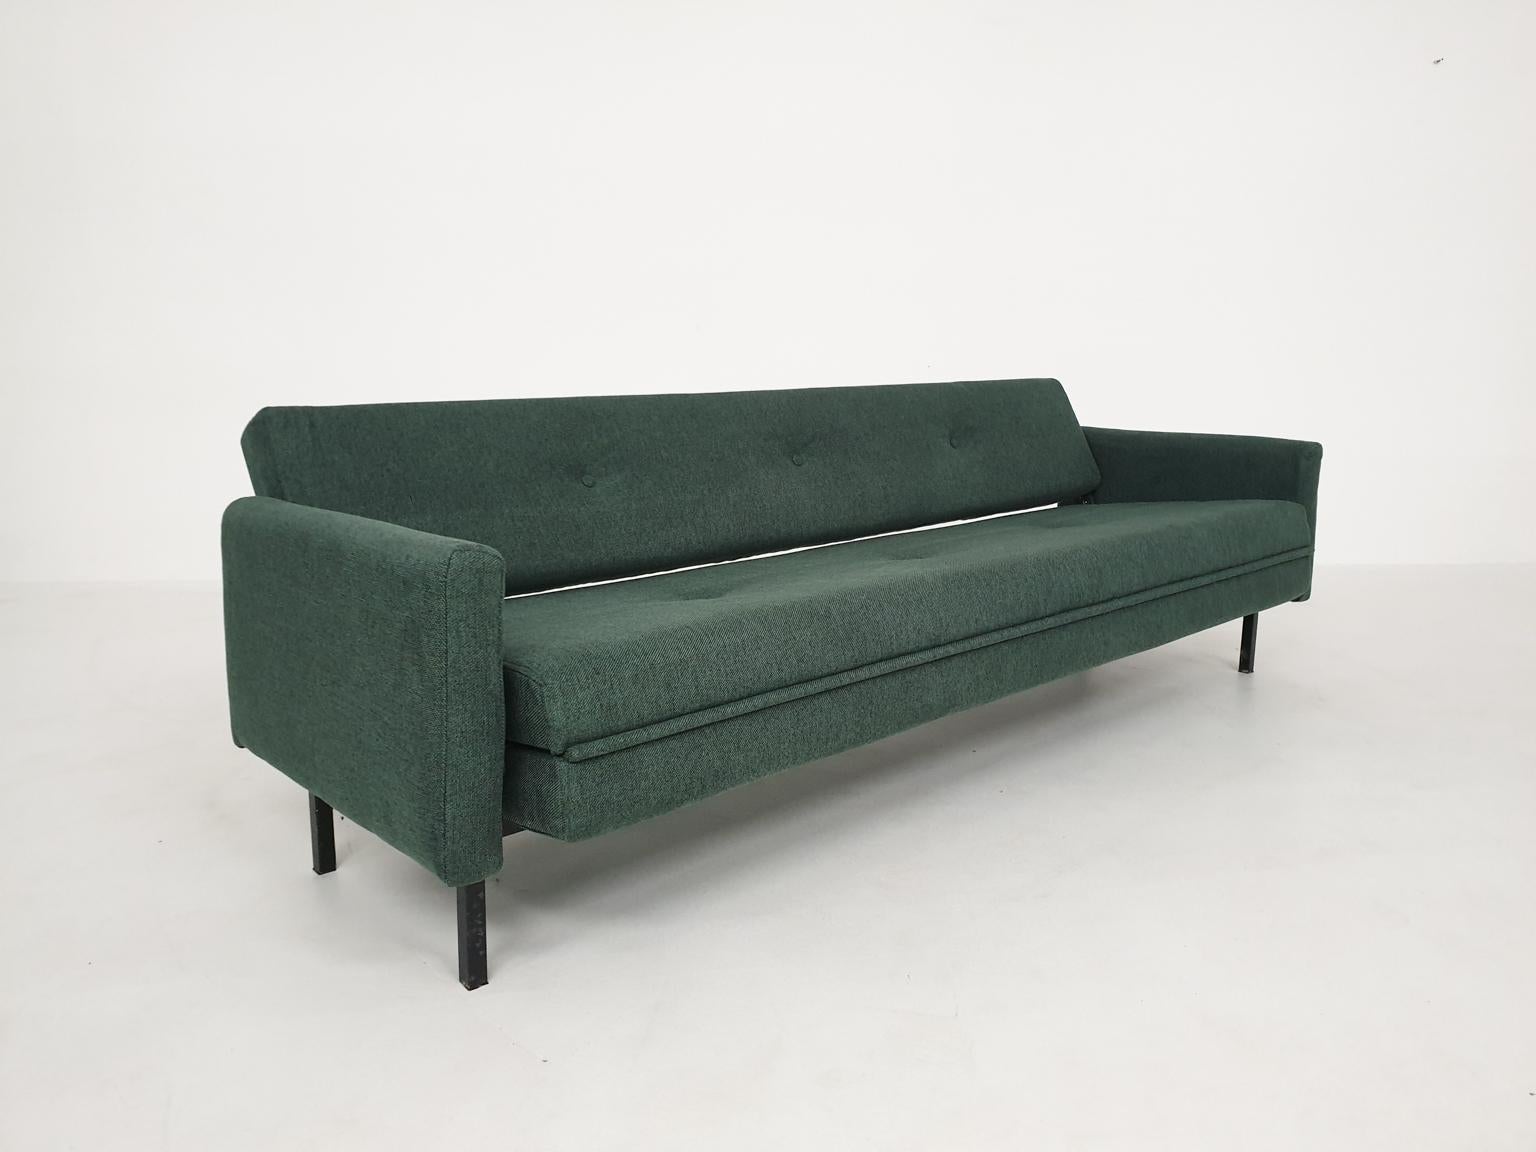 This sofa is model BR 49, often referred to as Model BR39/49, a design by Martin Visser for 't Spectrum the Netherlands. This sofa one of the most rare and sought after daybeds of the Dutch Midcentury.

In contradiction to the other sofa daybed by